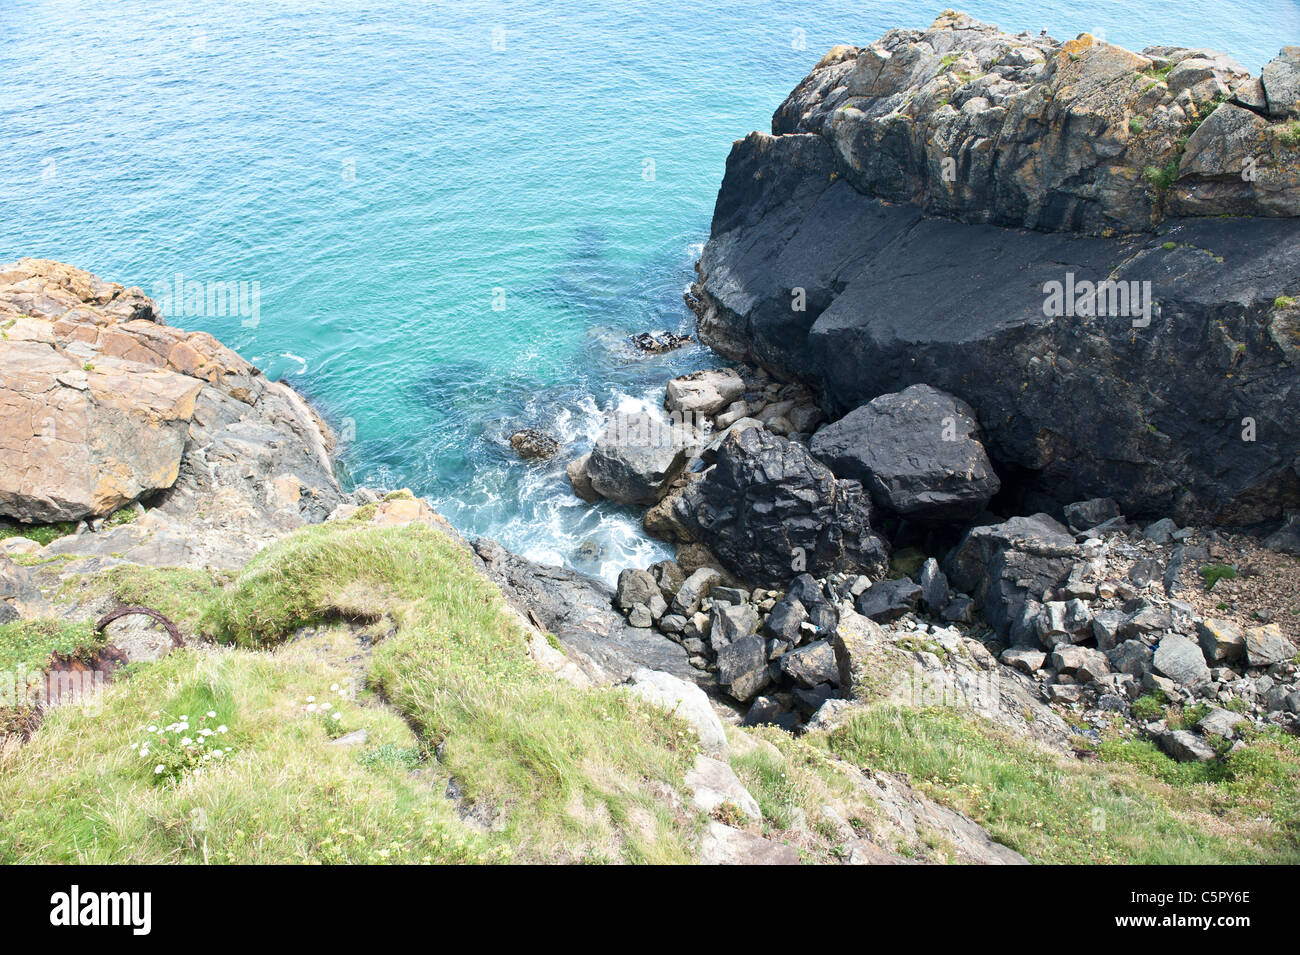 Rocks meet the lashing waves of the sea at the coast in St Ives, Cornwall. Stock Photo